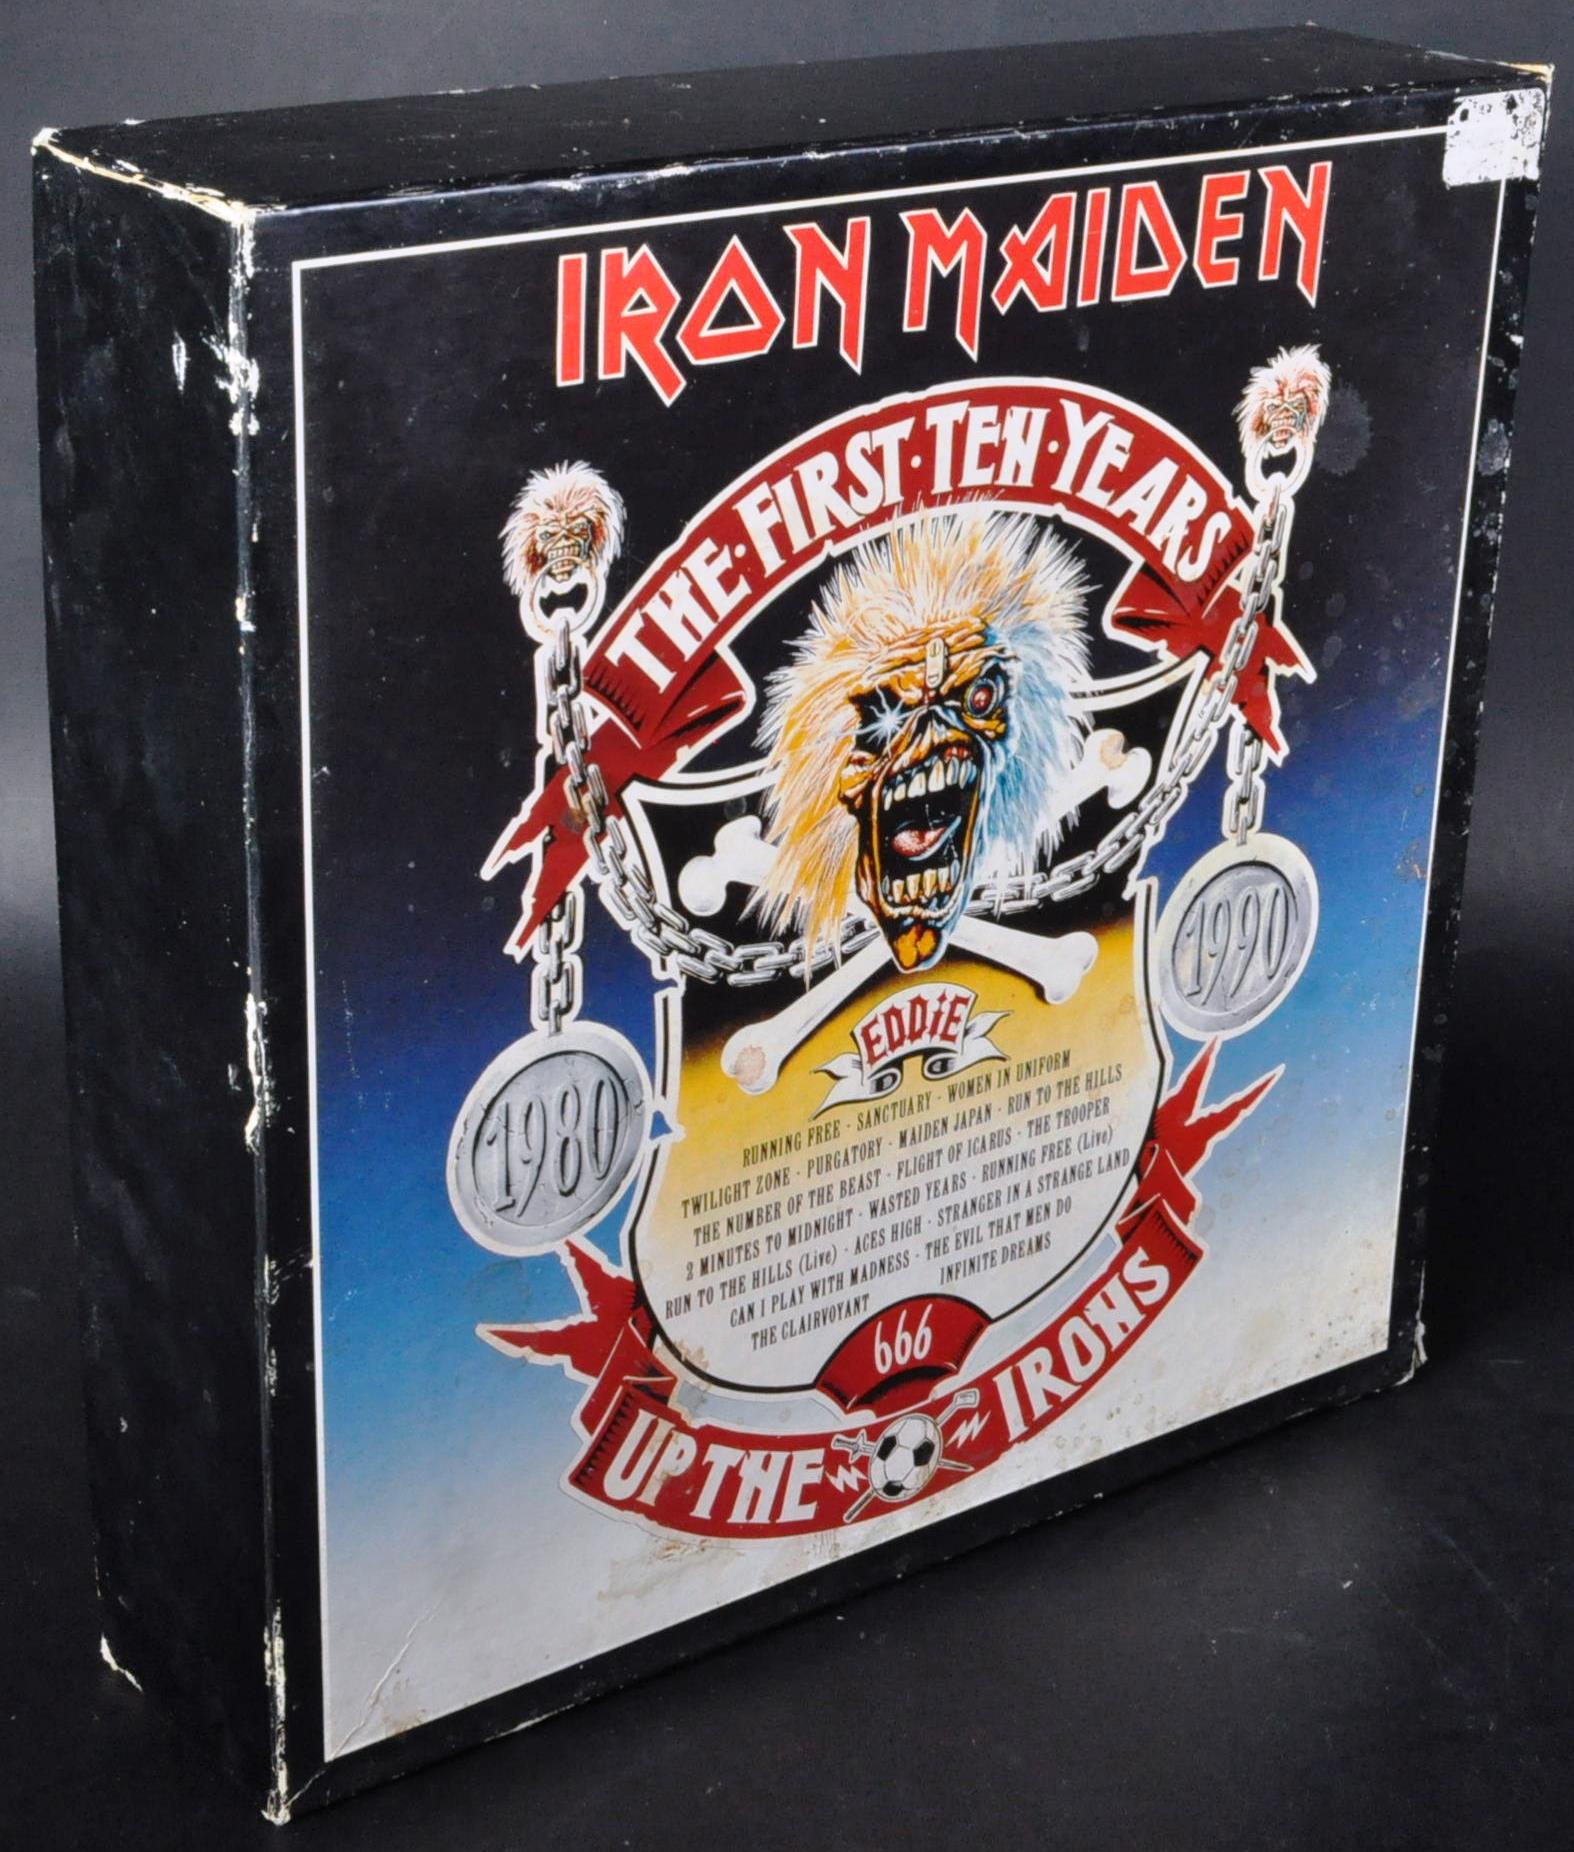 IRON MAIDEN - THE FIRST TEN YEARS - 20X 12" SINGLES BOXSET - Image 5 of 5